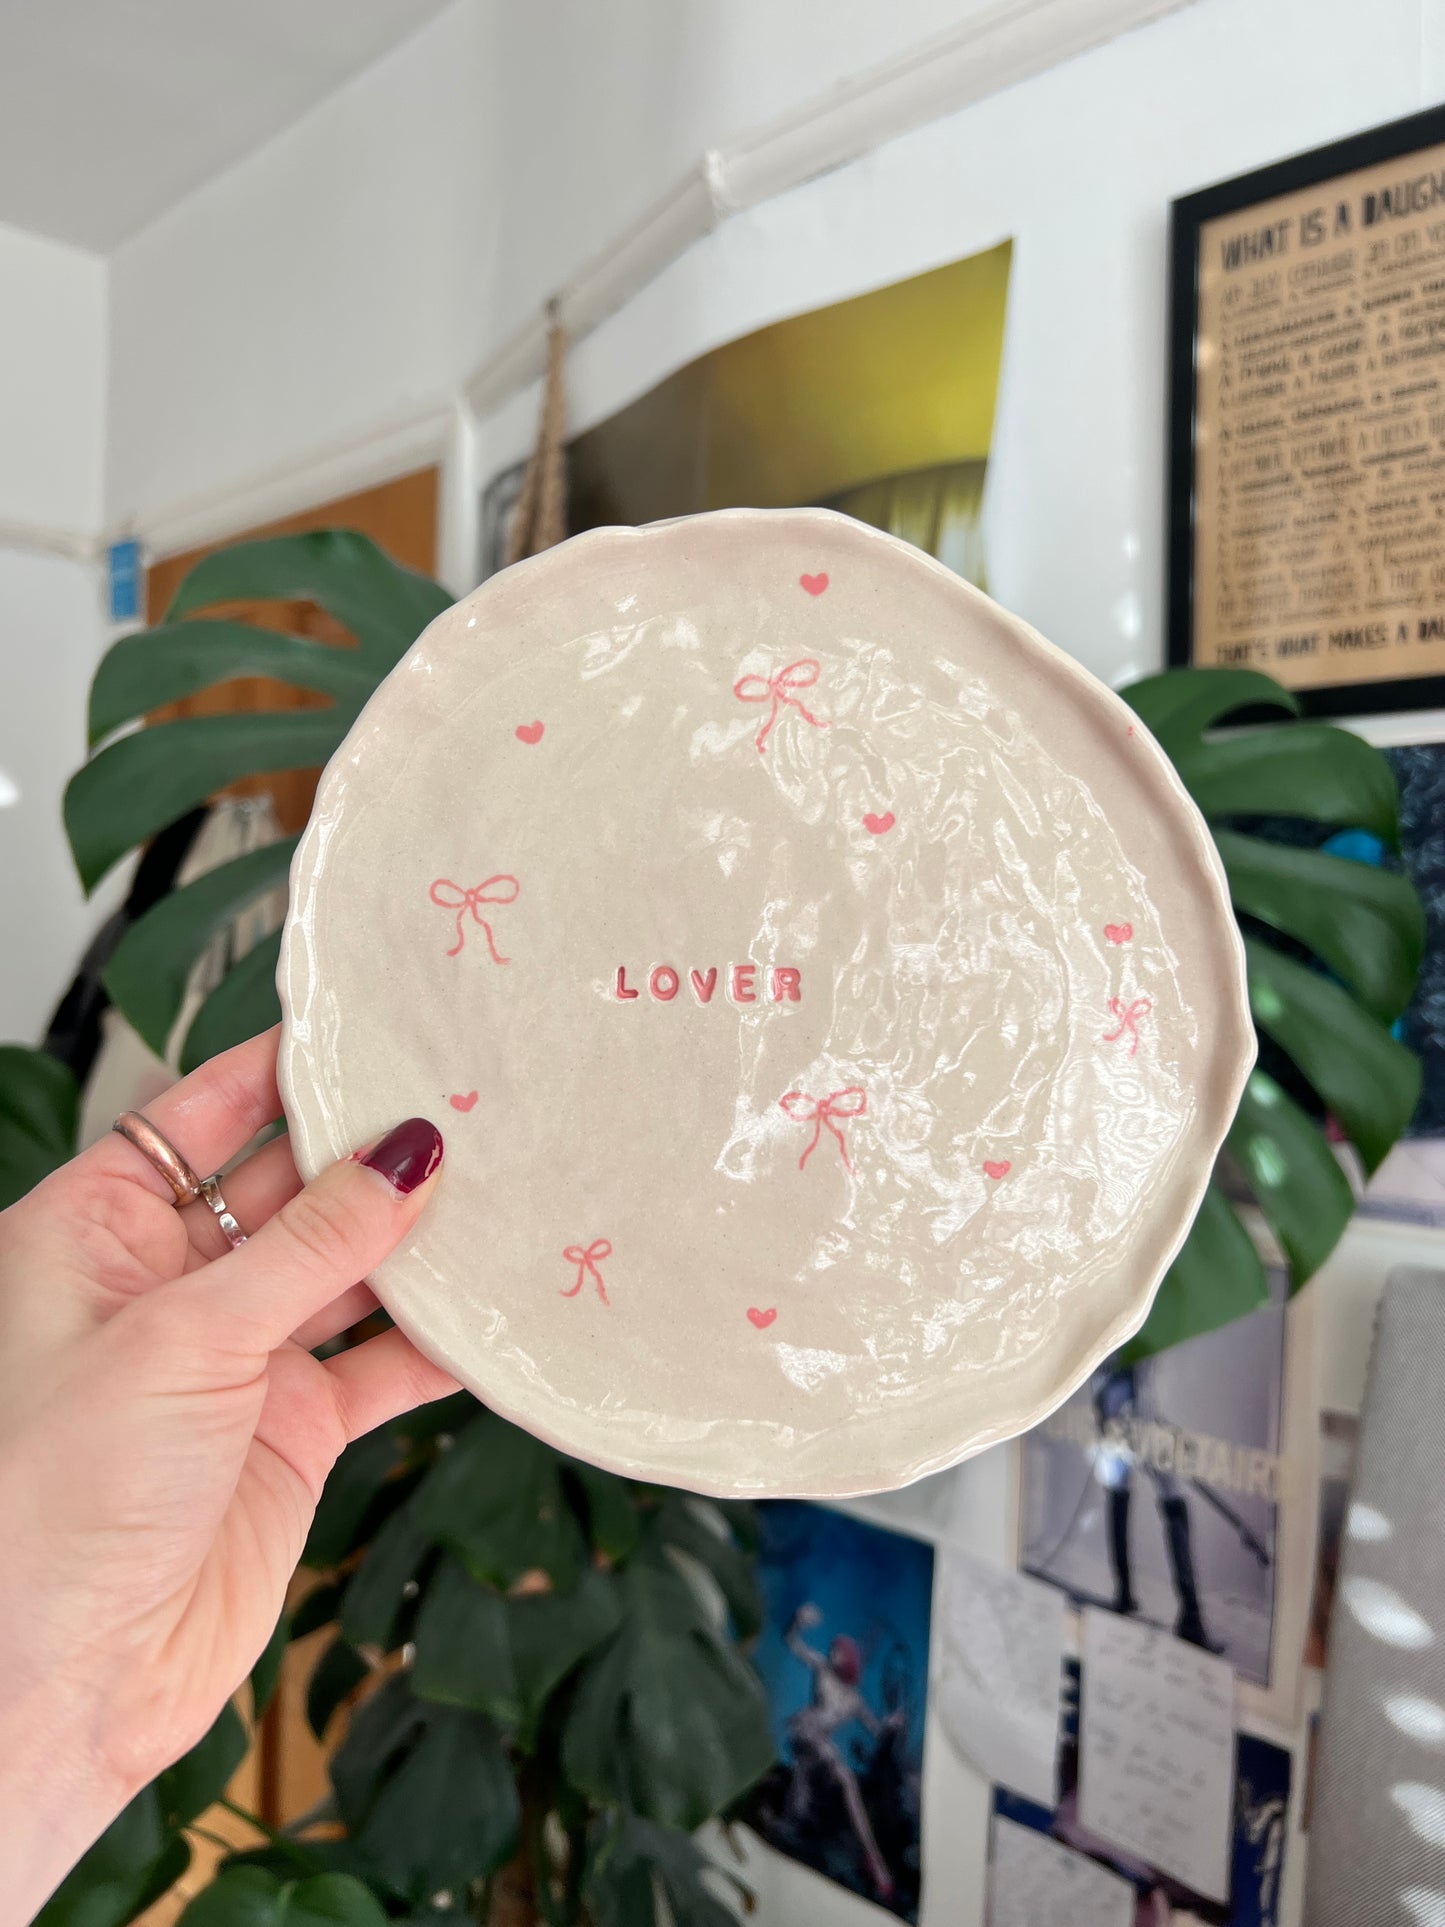 The Lover plate